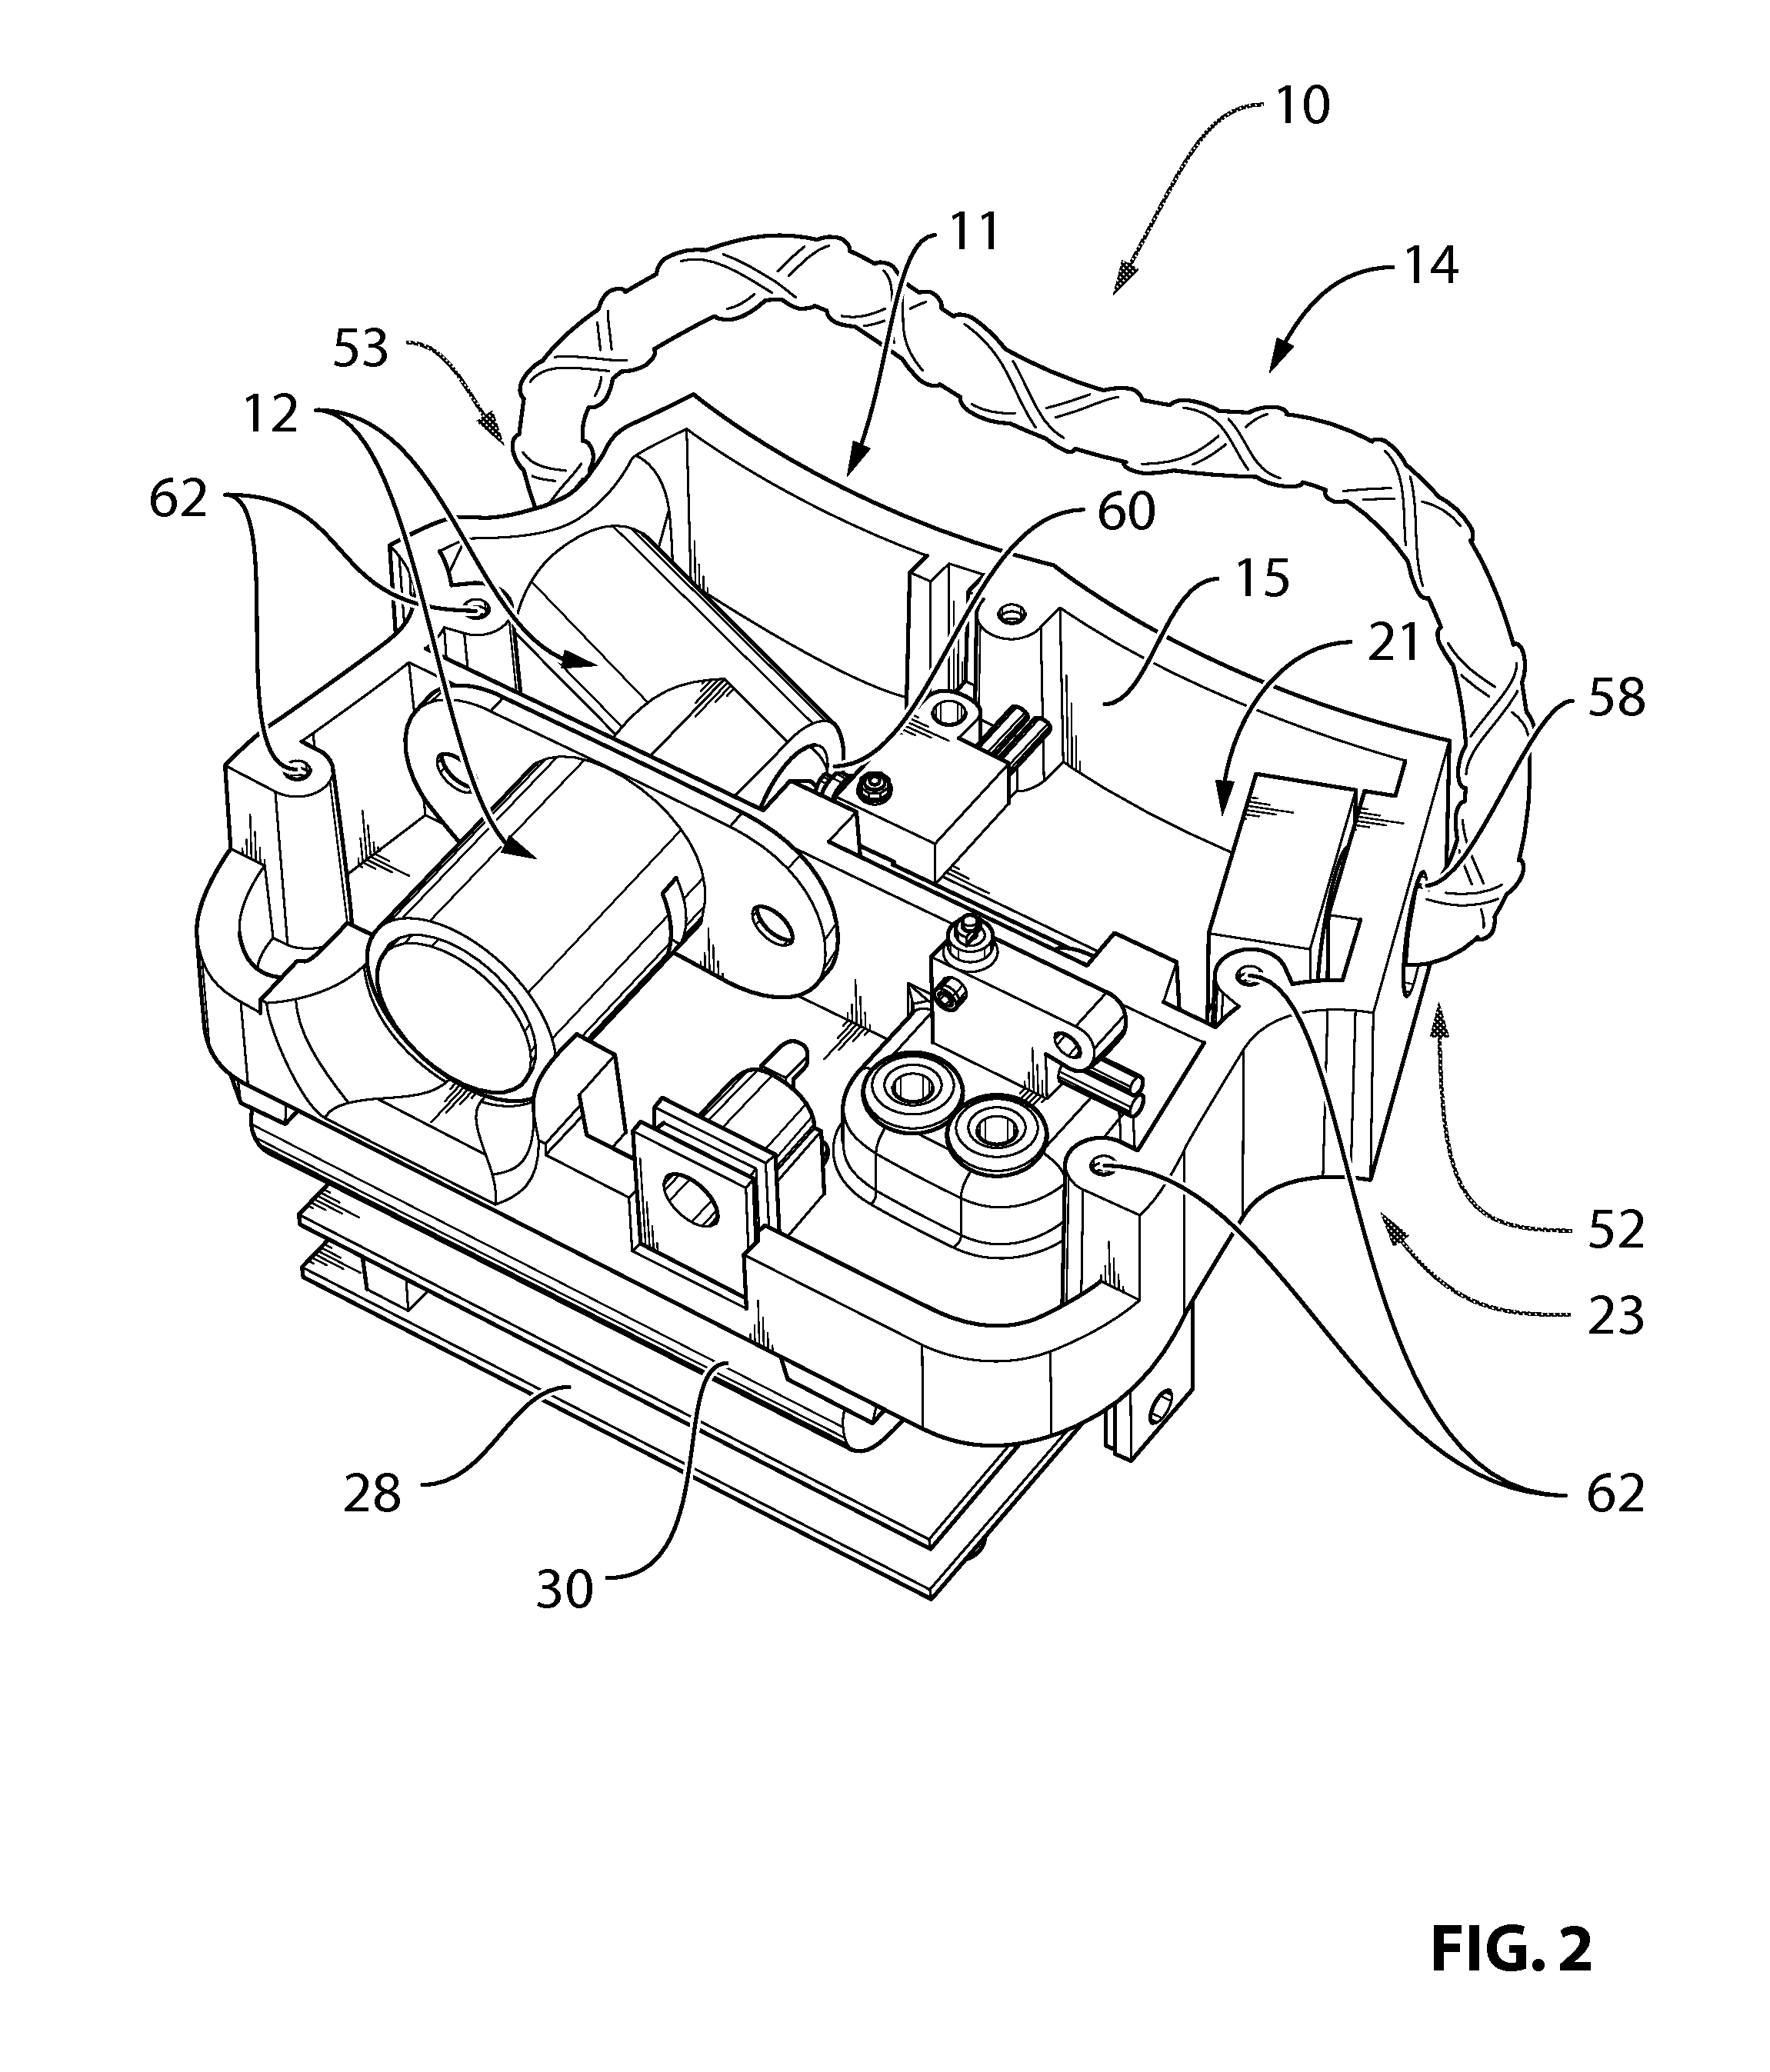 Electronic locking device for securing goods